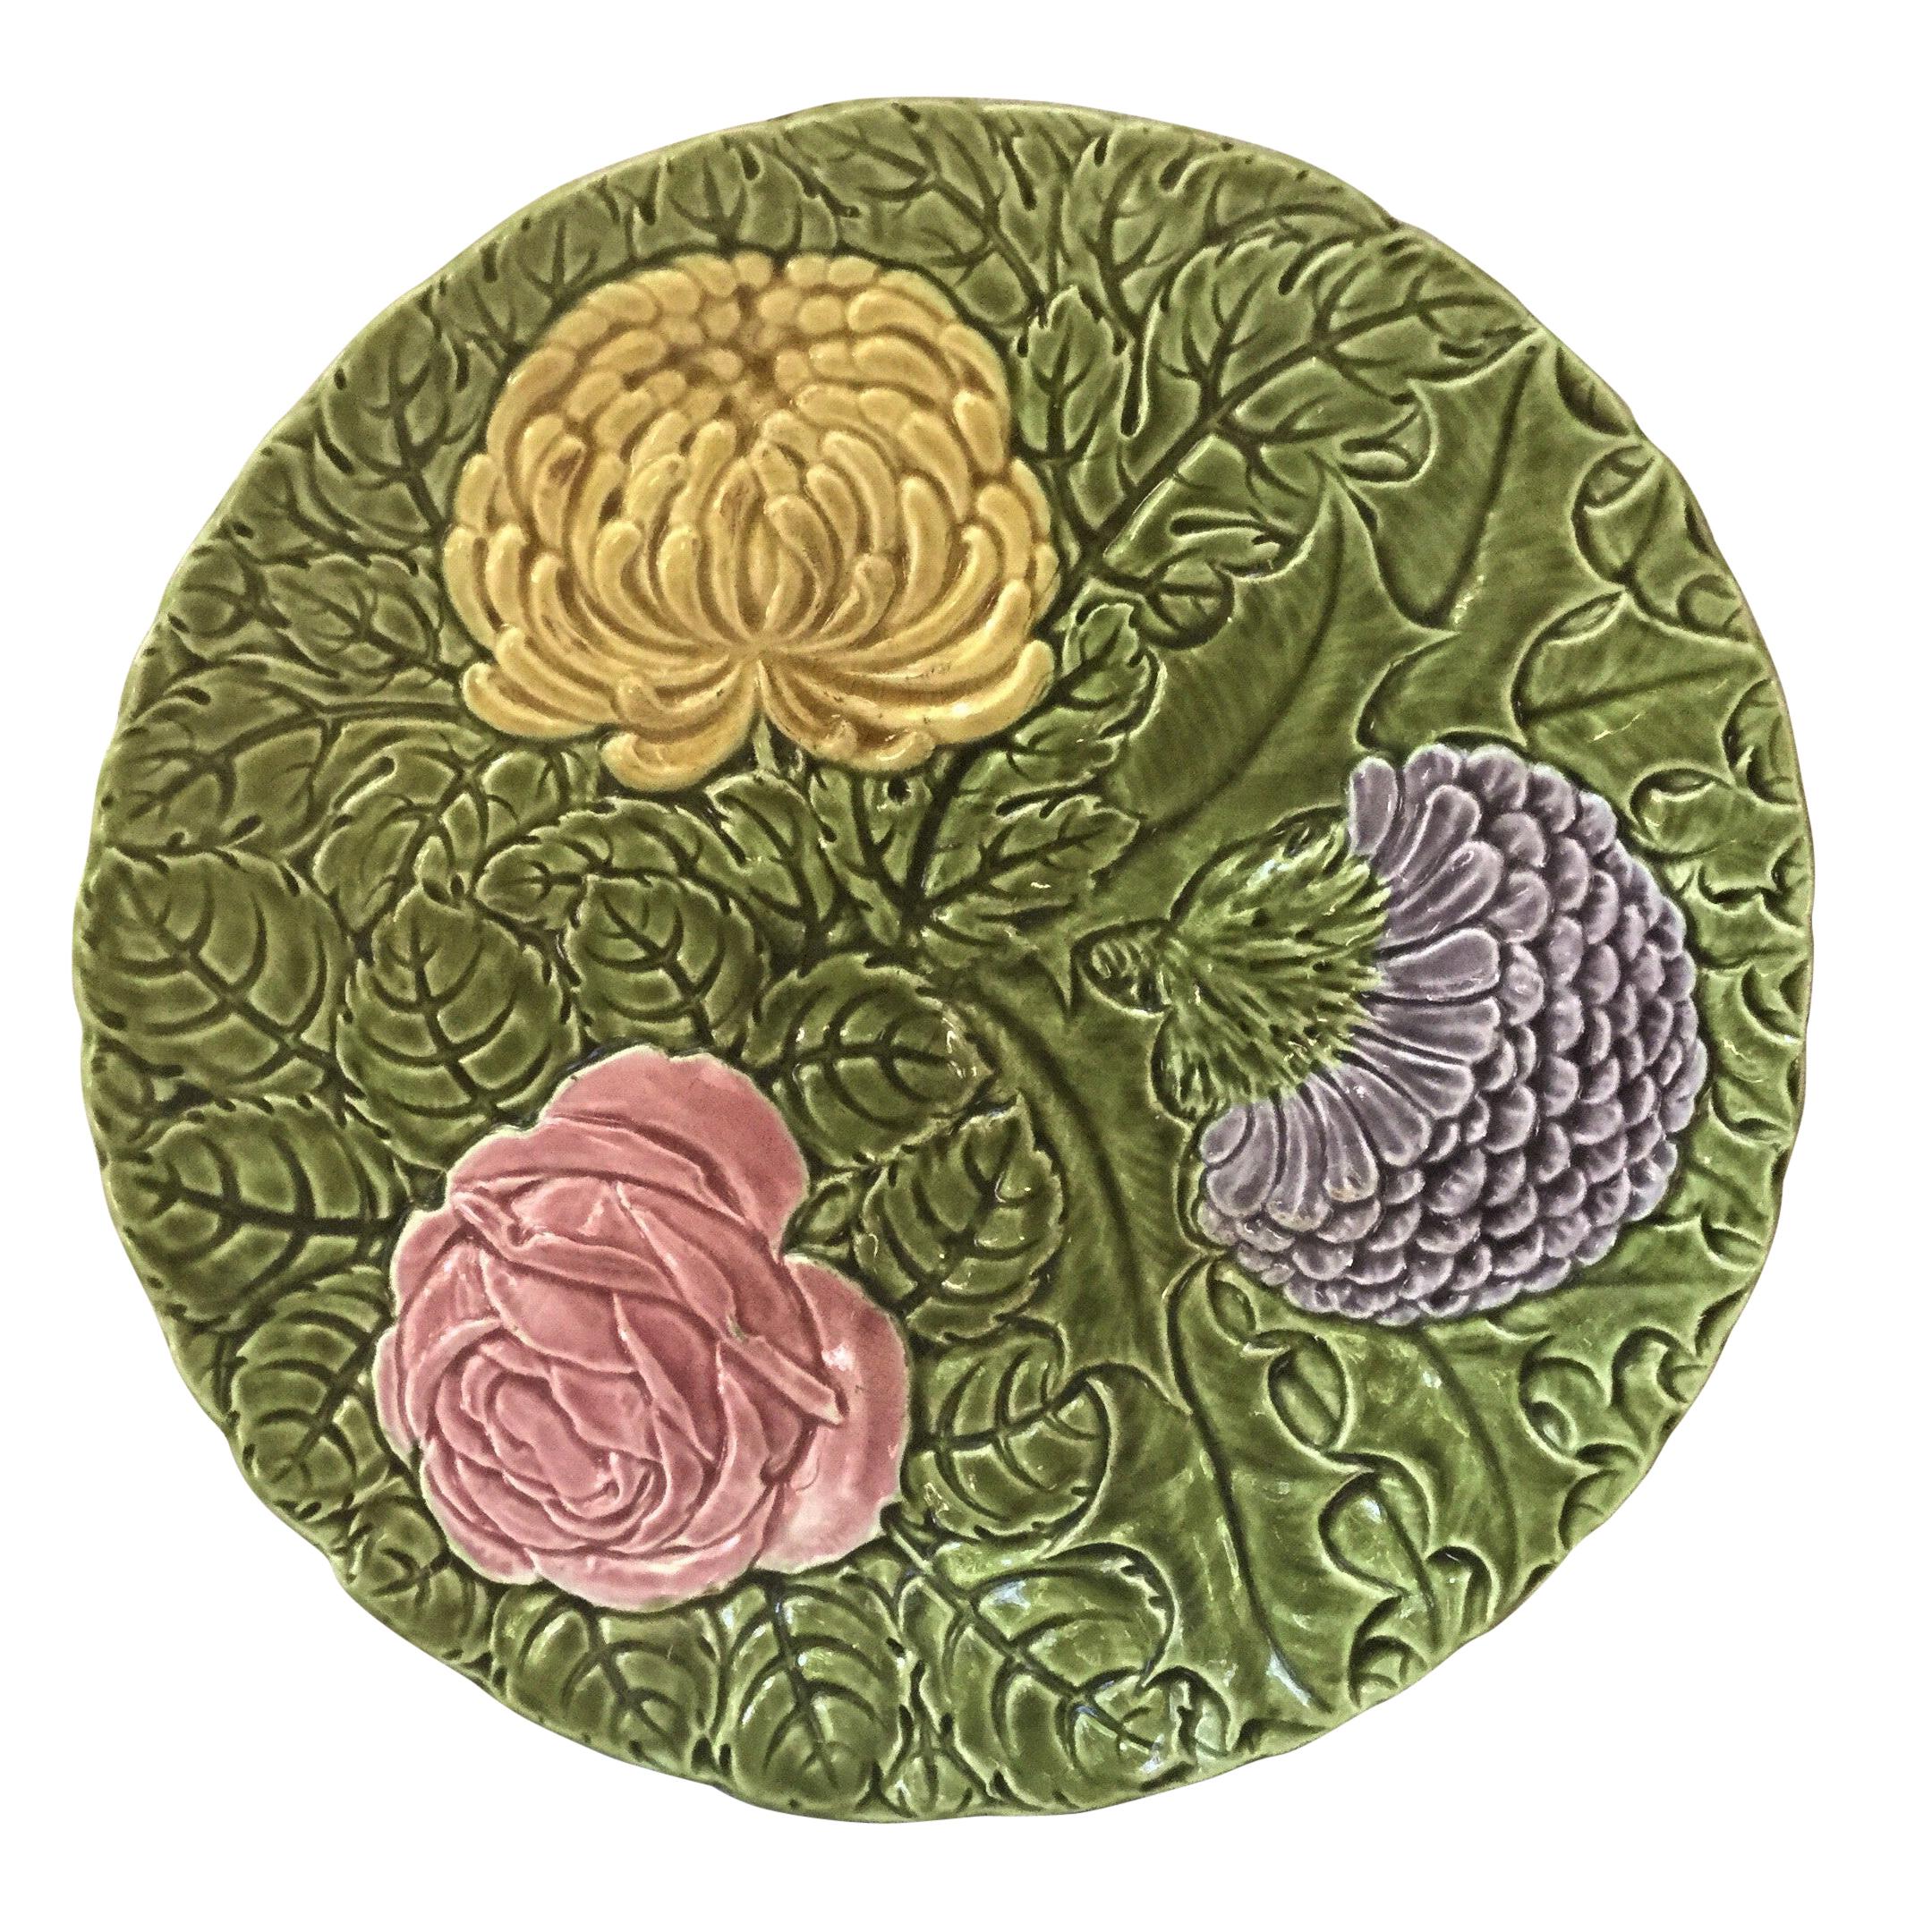 Green Sarreguemines Platter with Large Majolica Flowers, circa 1900 For Sale